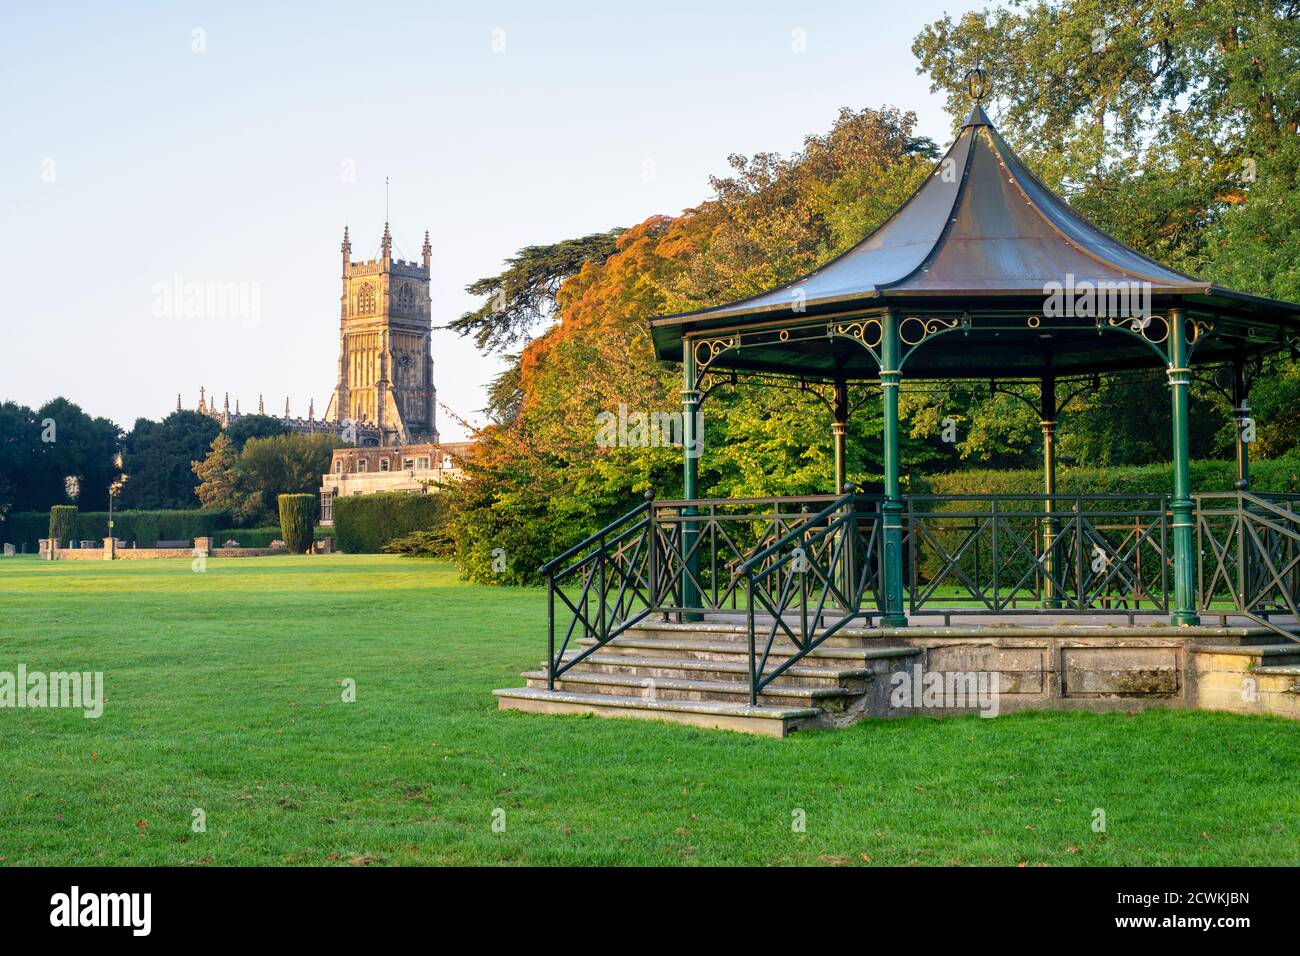 The Church of St. John the Baptist and the bandstand in the abbey grounds at sunrise in autumn. Cirencester, Cotswolds, Gloucestershire, England Stock Photo